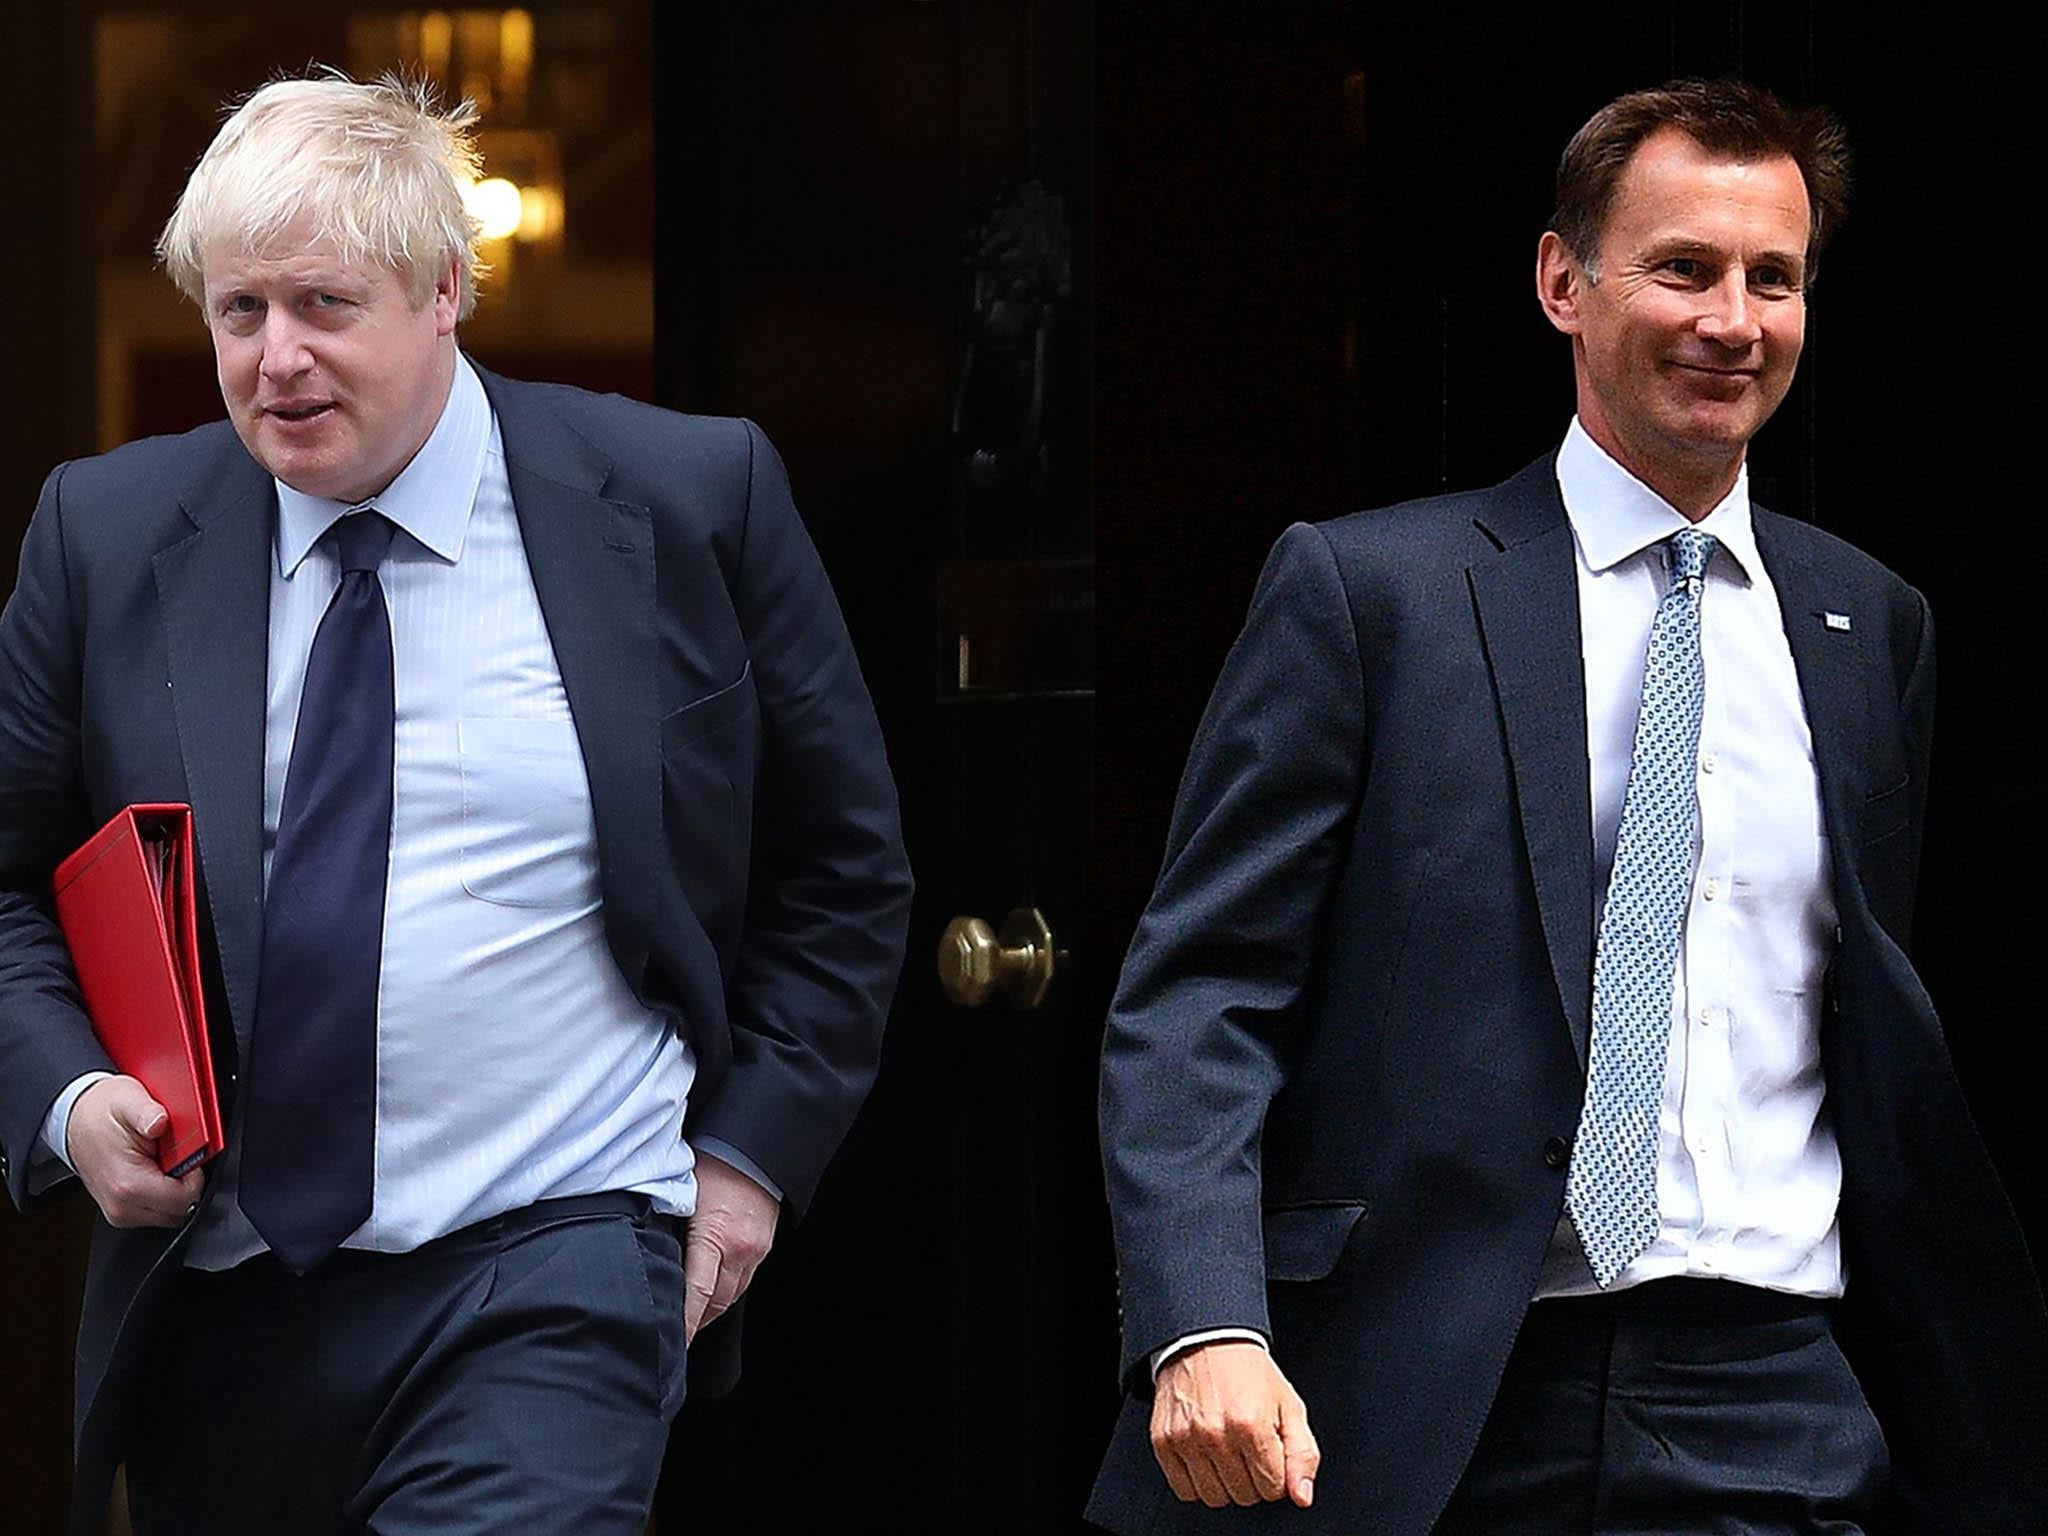 Tory leadership: Hunt says Brexit negotiation is a matter of 'trust' in swipe at Johnson